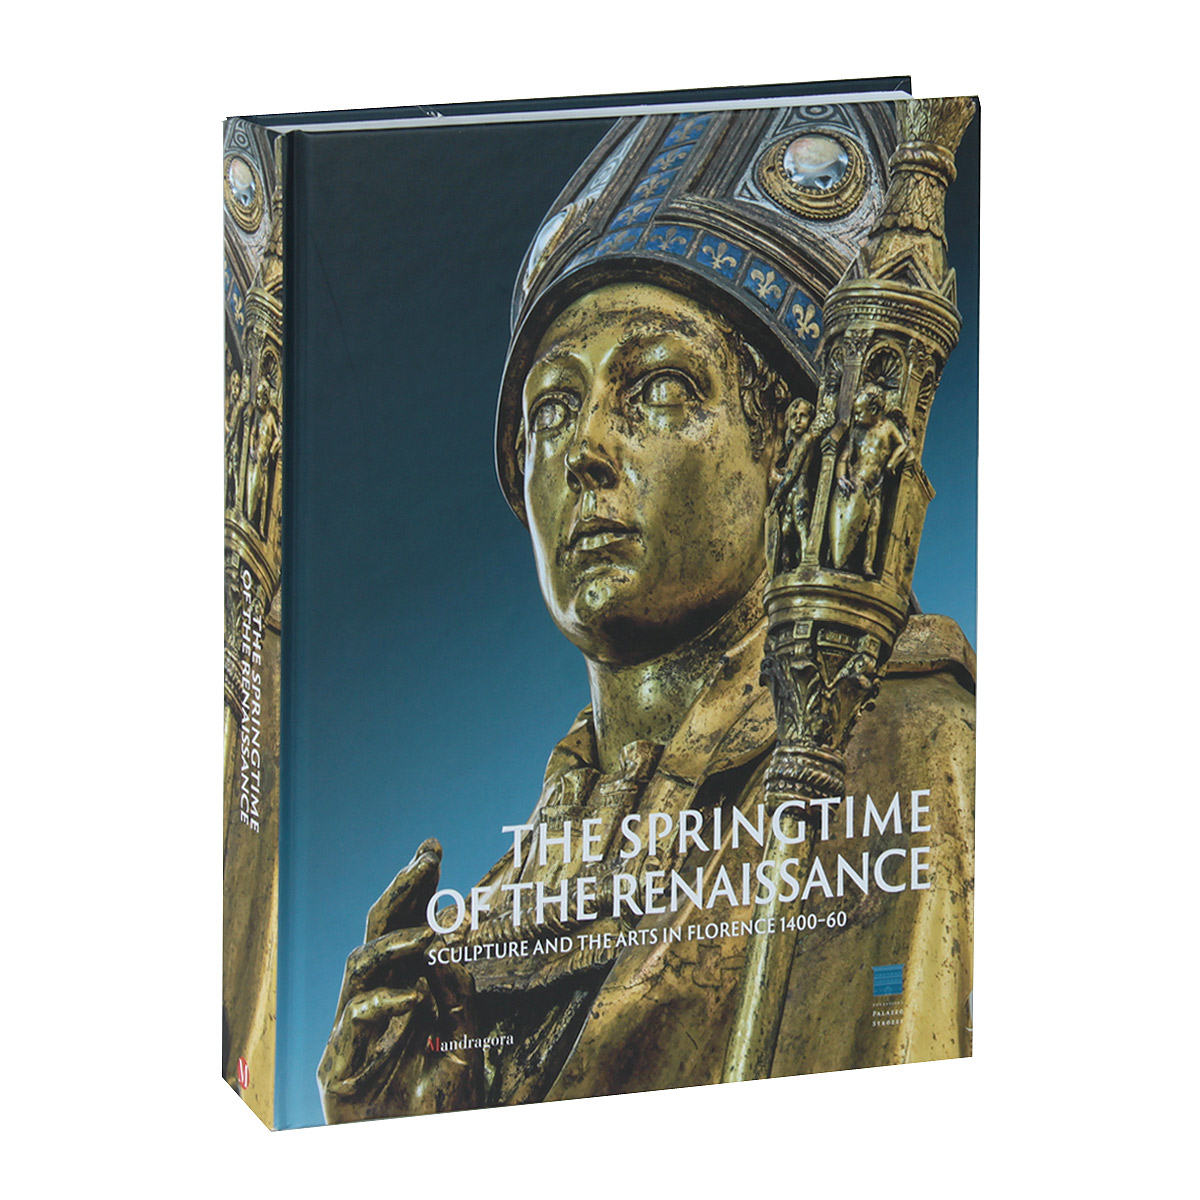 The Springtime of the Renaissance: Sculpture and the Arts in Florence 1400-60